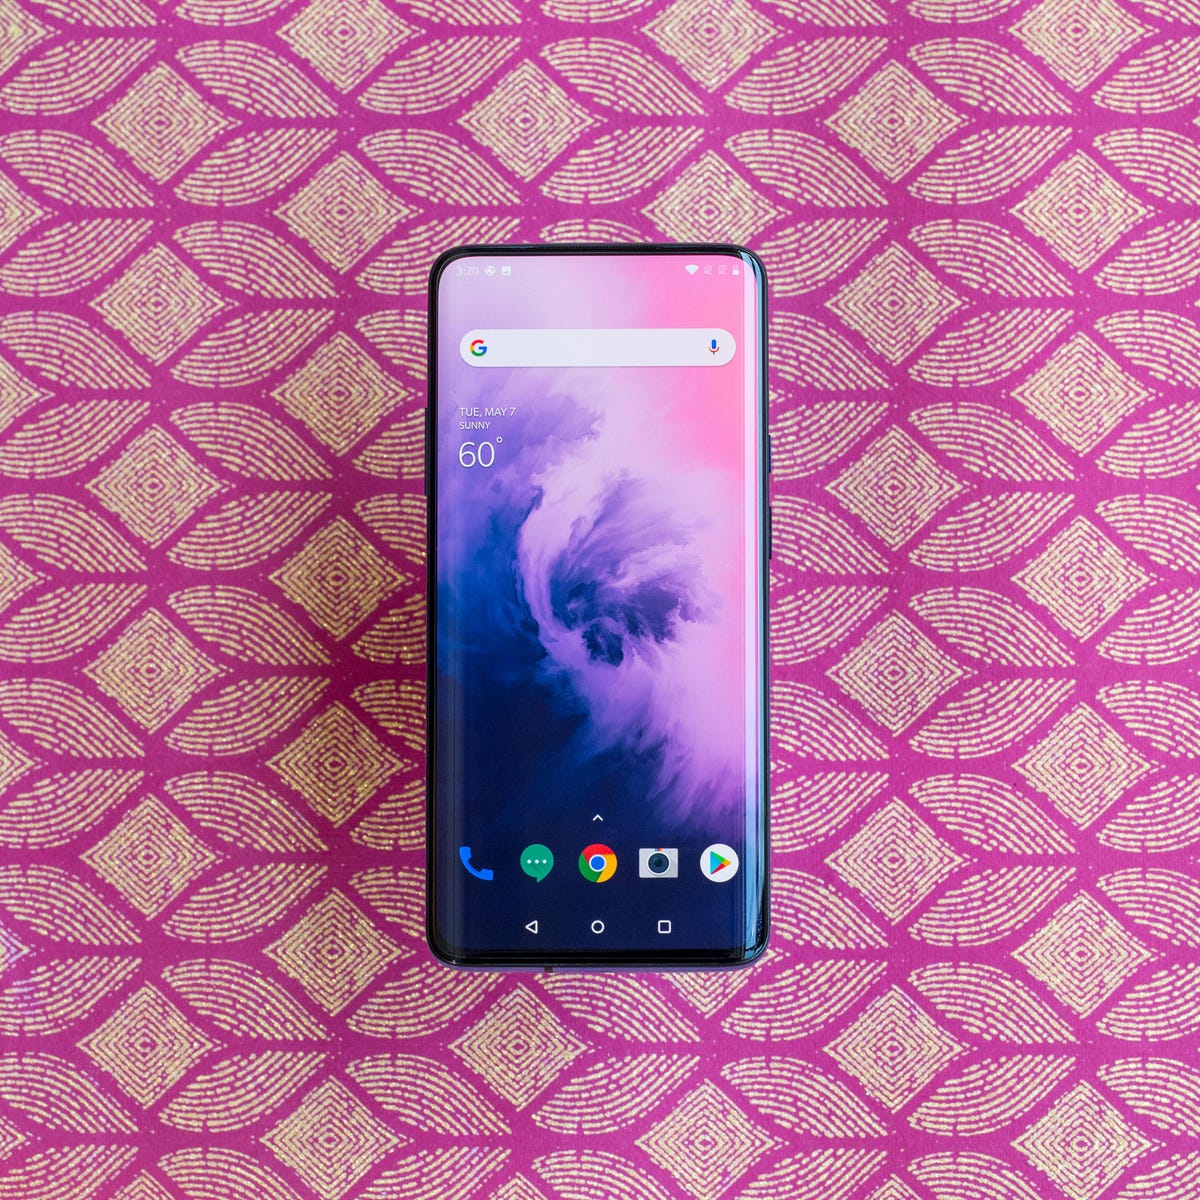 raket dictator straal OnePlus 7 Pro review: The best Android phone value of 2019 - CNET